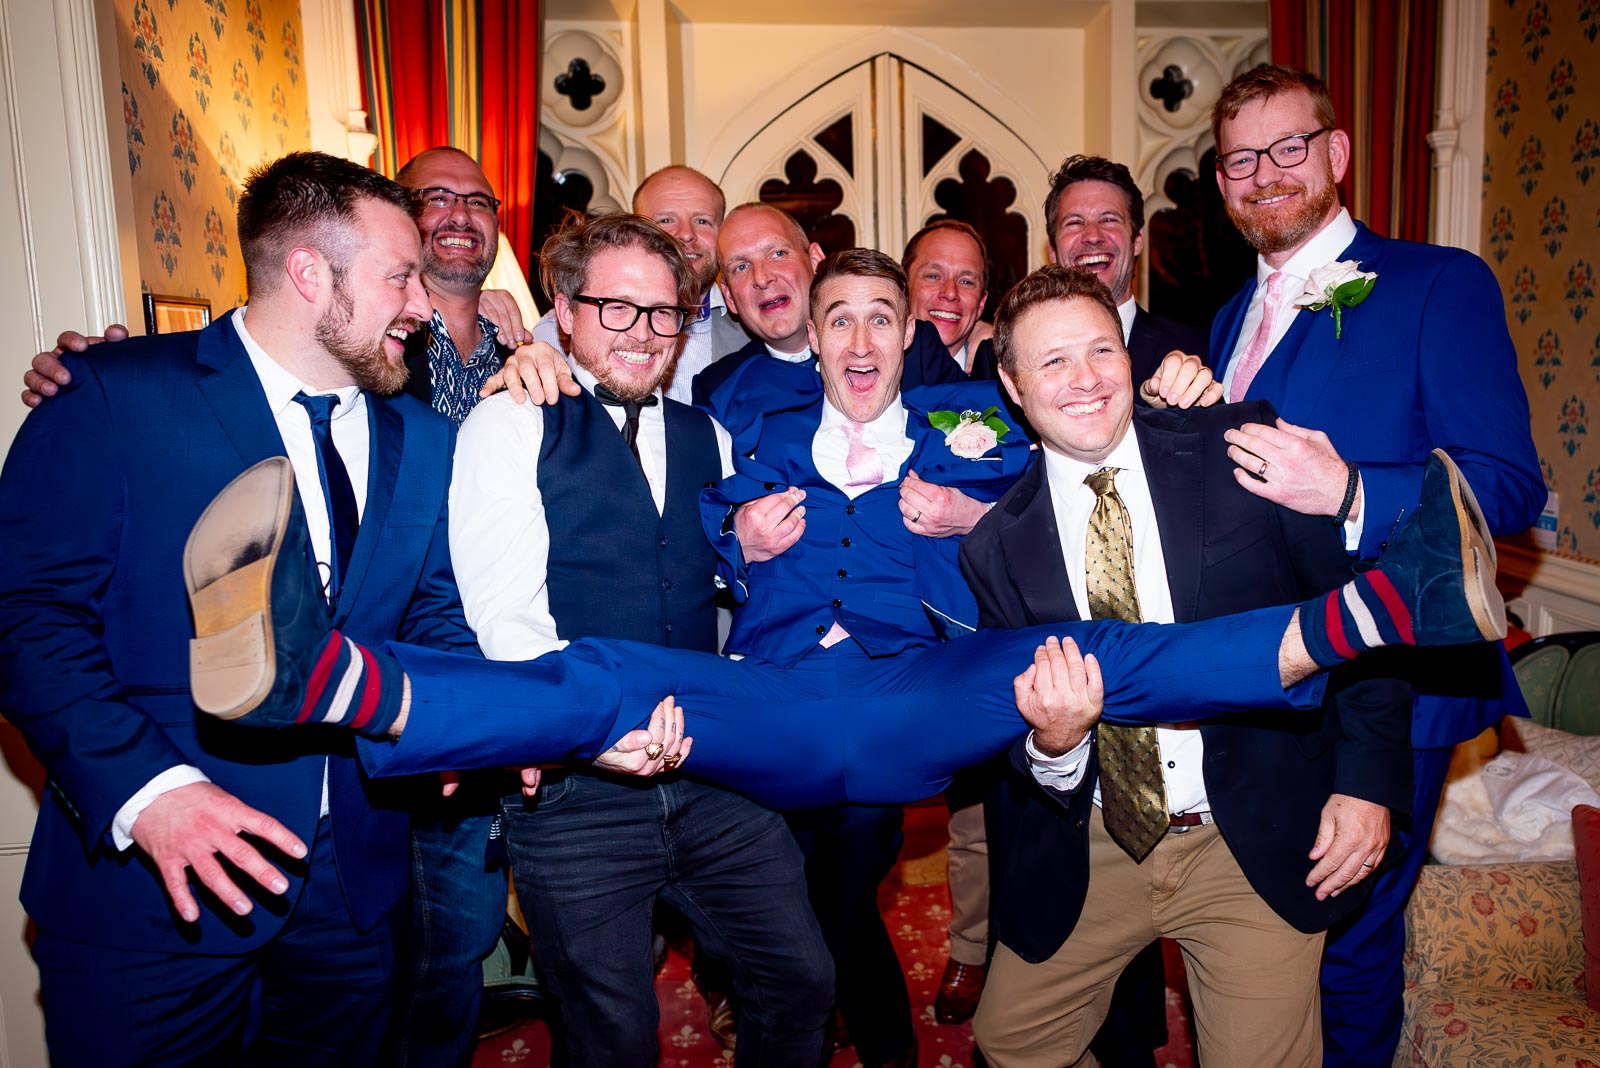 Simon's groomsmen lift him in a funny pose during Simon and Virginia's wedding reception at Horsted Place Hotel.